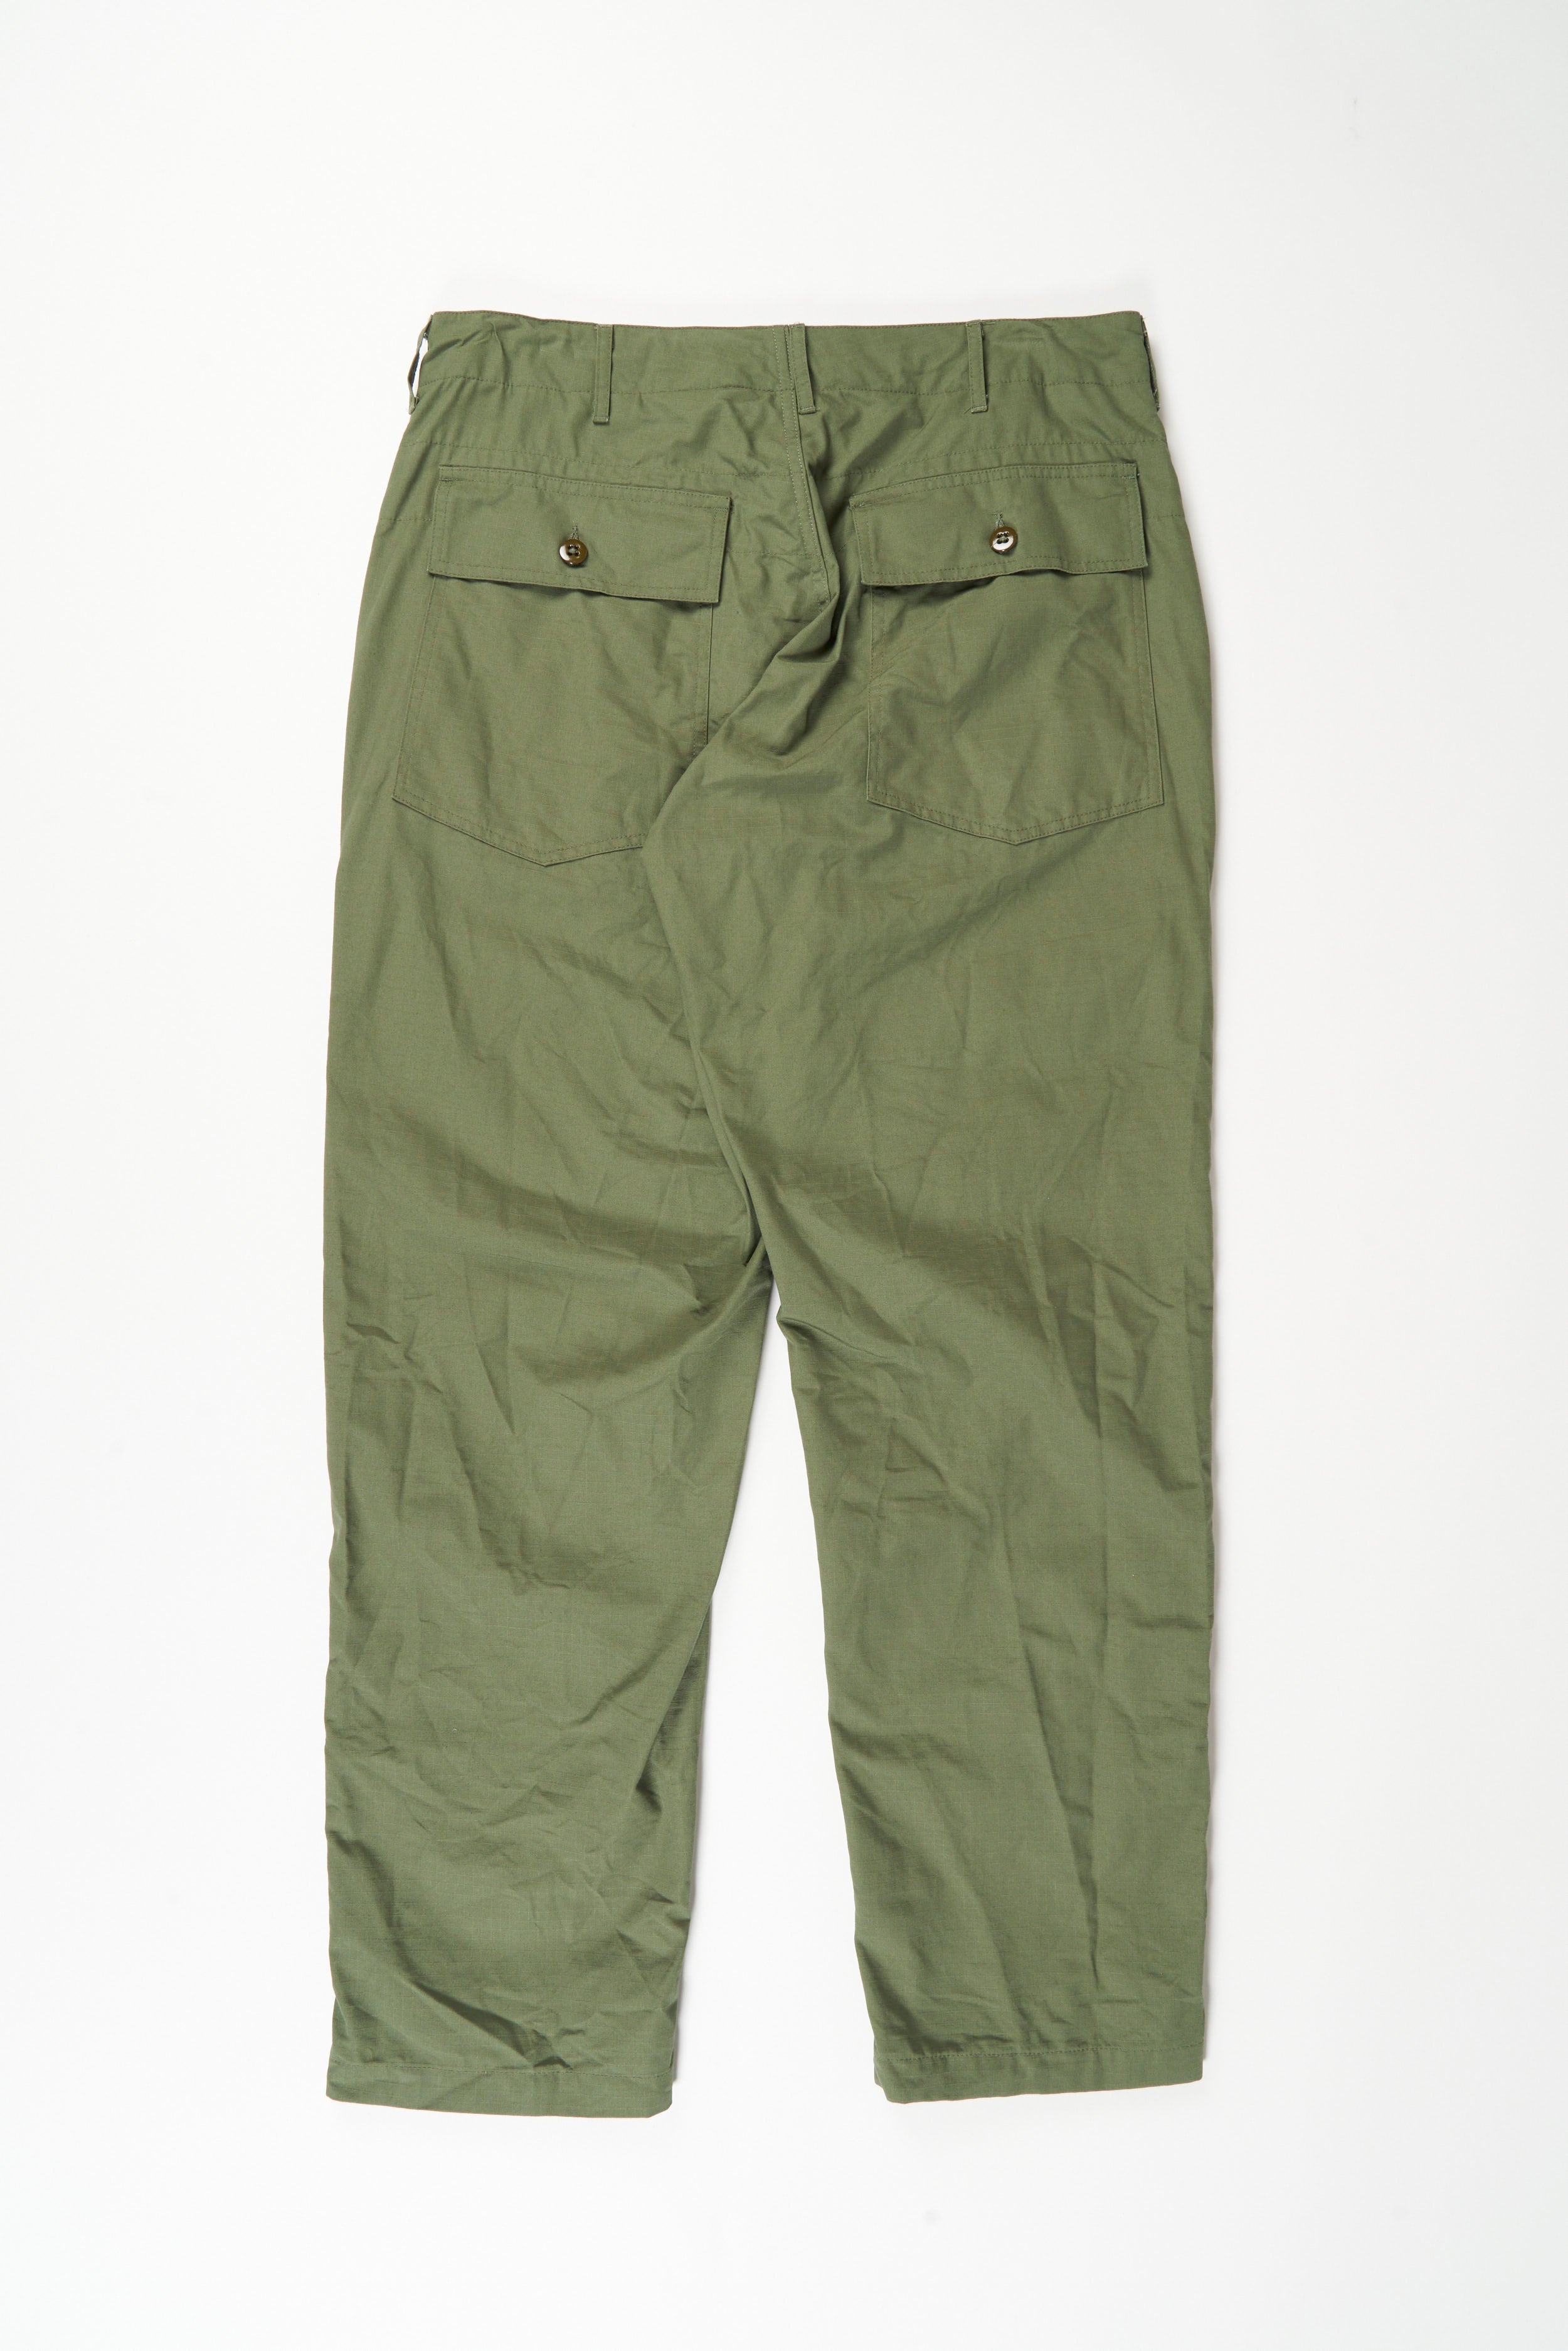 Engineered Garments Fatigue Pant  - Olive Cotton Ripstop